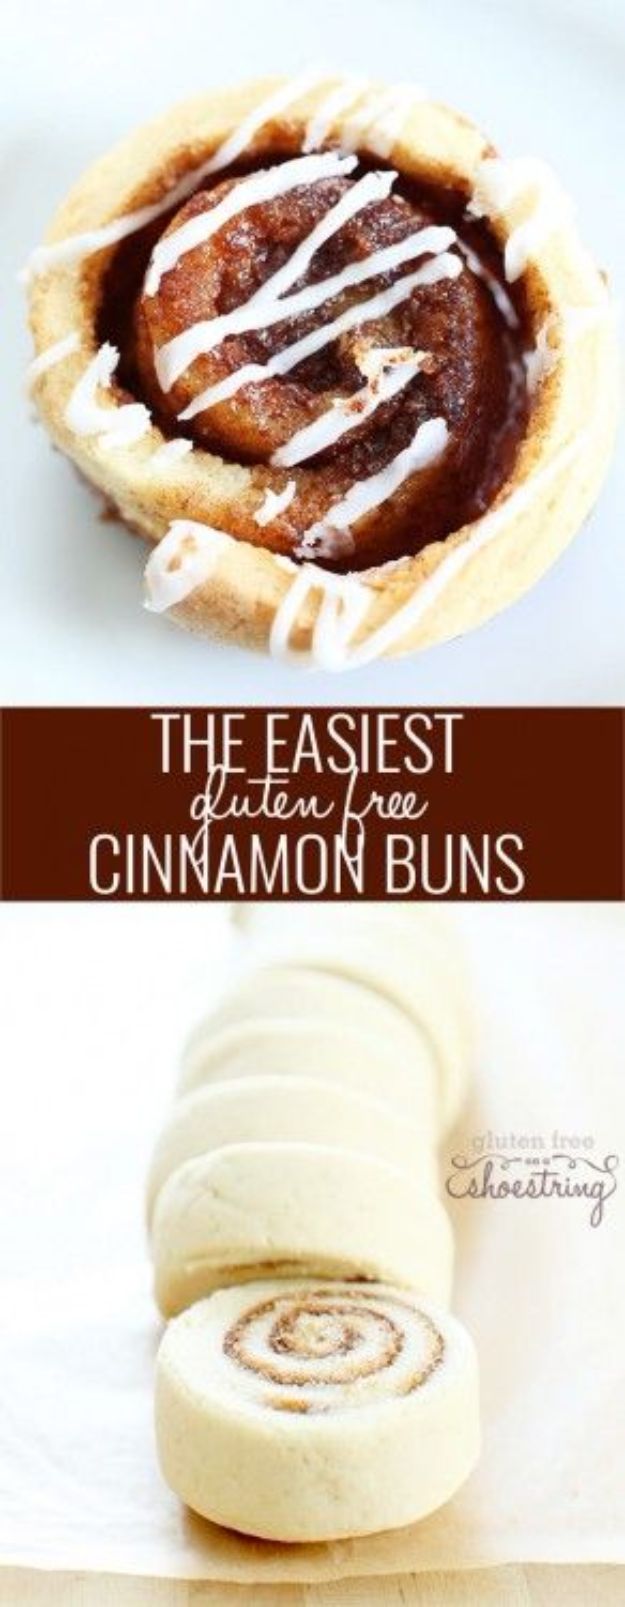 Gluten Free Desserts - Yeast Free, Gluten Free Cinnamon Buns - Easy Recipes and Healthy Recipe Ideas for Cookies, Cake, Pie, Cupcakes, Cheesecake and Ice Cream - Best No Sugar Glutenfree Chocolate, No Bake Dessert, Fruit, Peach, Apple and Banana Dishes - Flourless Christmas, Thanksgiving and Holiday Dishes #glutenfree #desserts #recipes